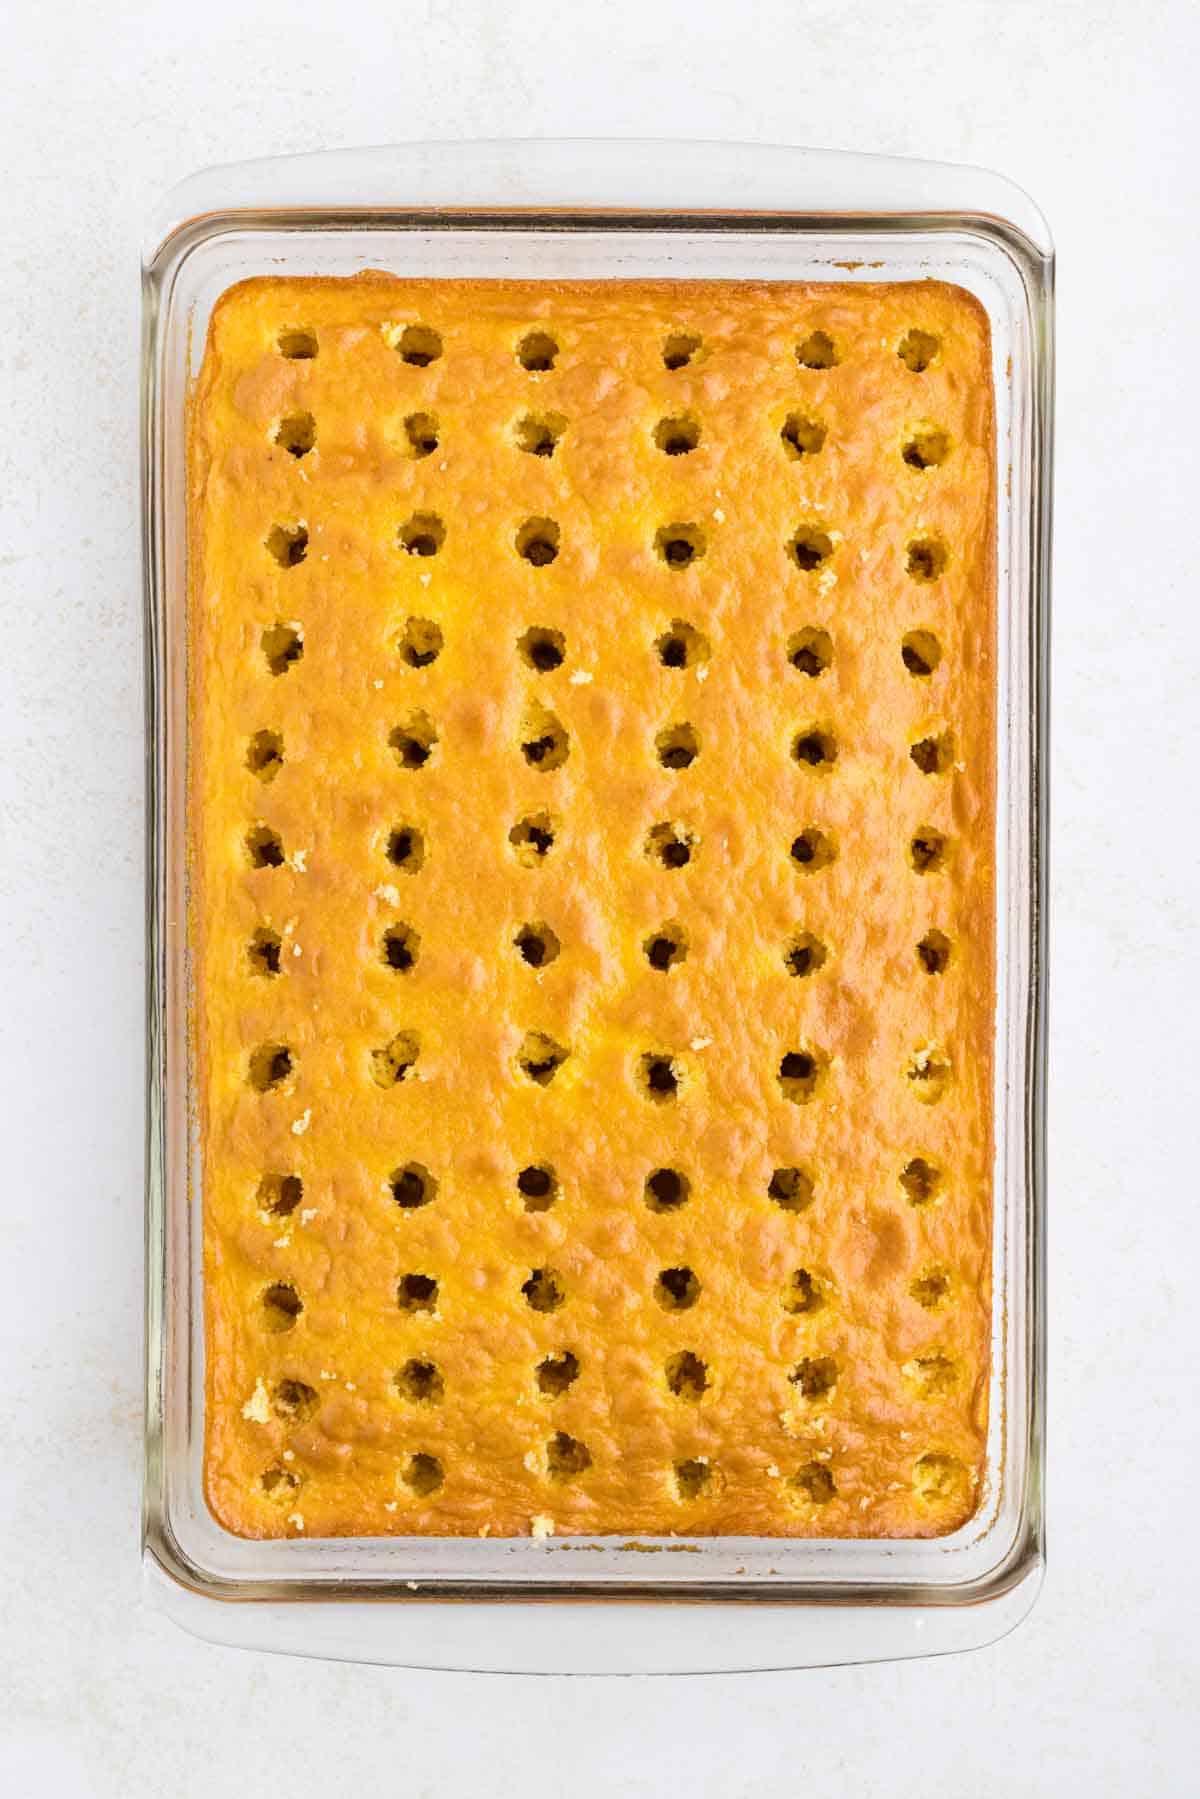 rows of holes poked in a lemon cake